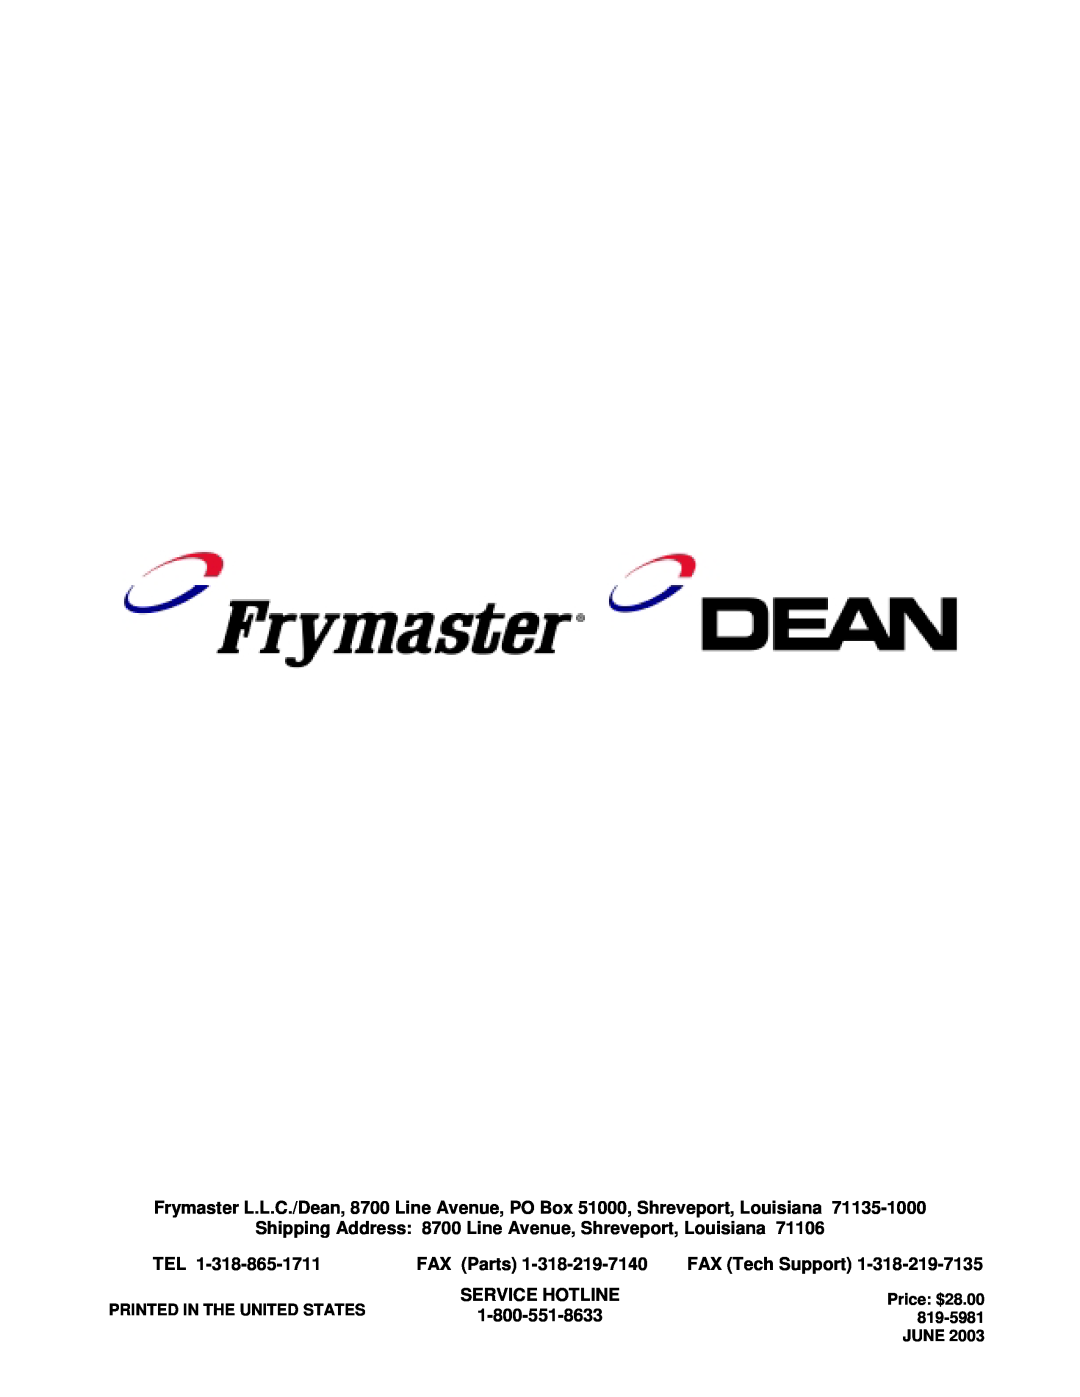 Frymaster Ultimate Electric Series manual FAX Parts, FAX Tech Support, Service Hotline, Price $28.00, 819-5981, June 